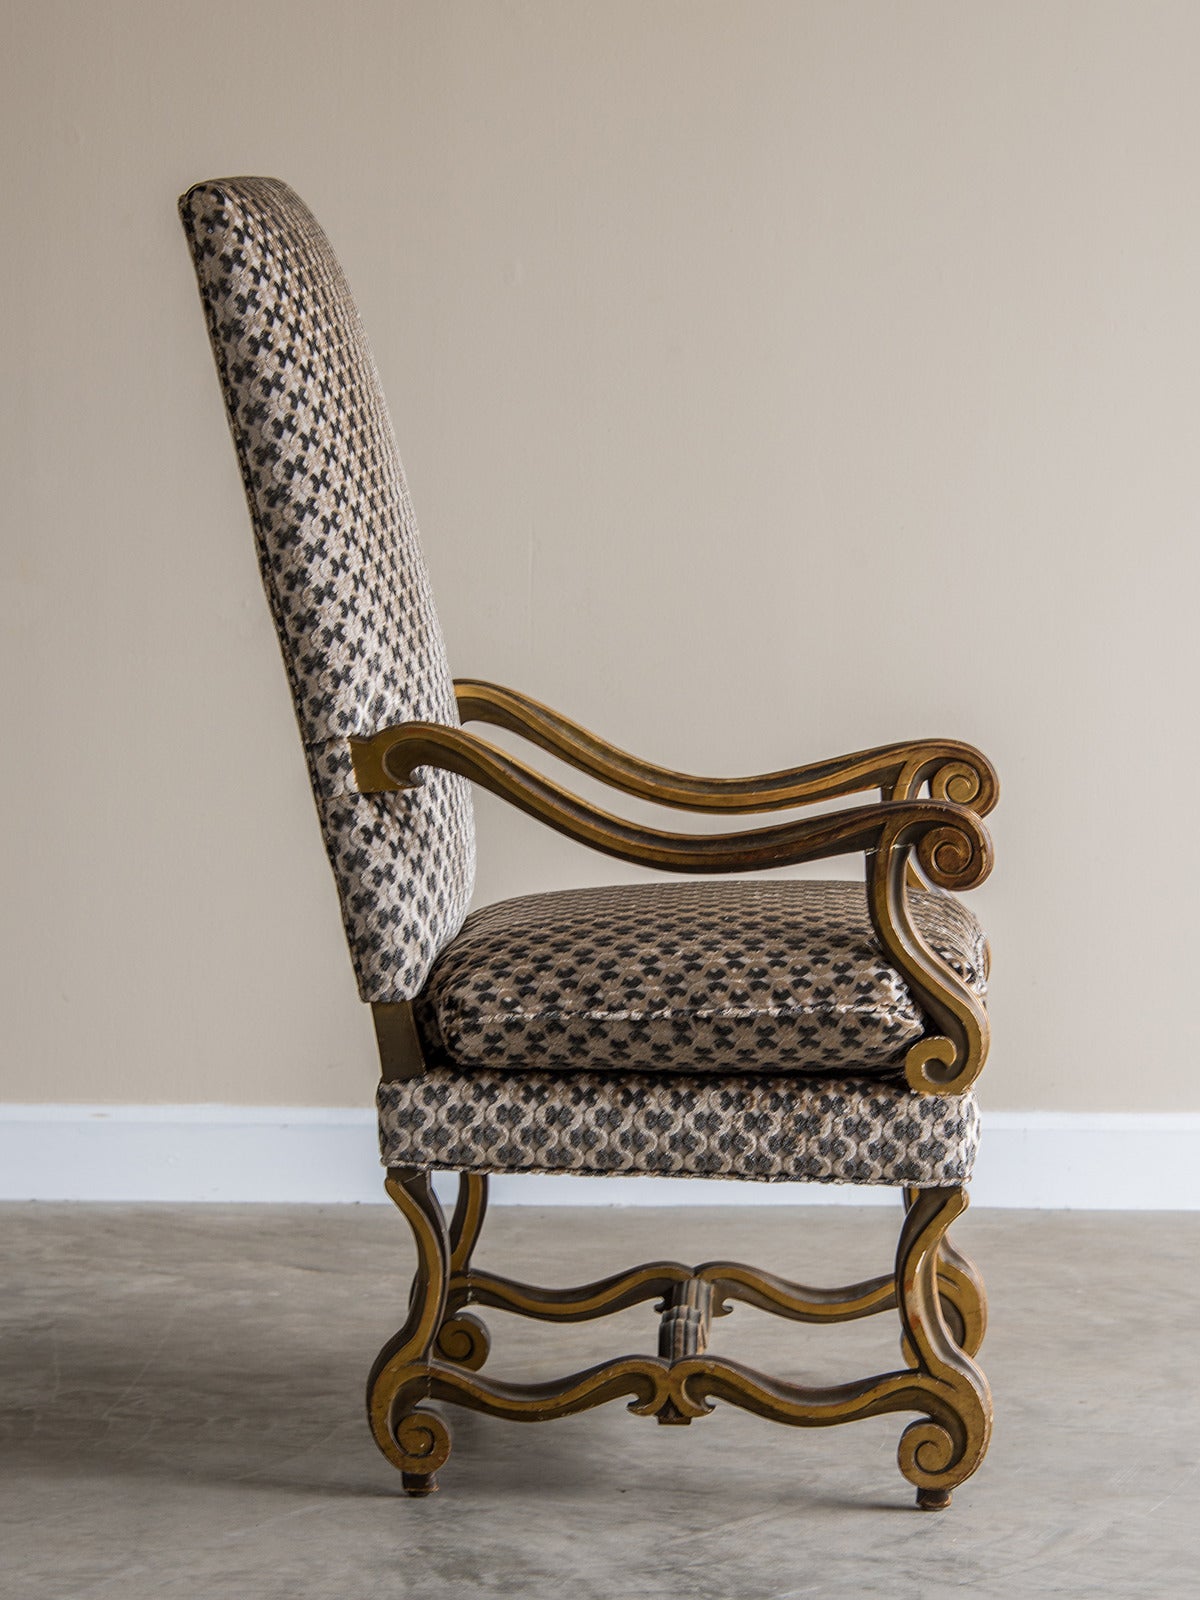 Receive our new selections direct from 1stdibs by email each week. Please click Follow Dealer below and see them first!

The sensuous lines of this elegant antique French mouton leg armchair circa 1875 first appeared during the reigns of Louis